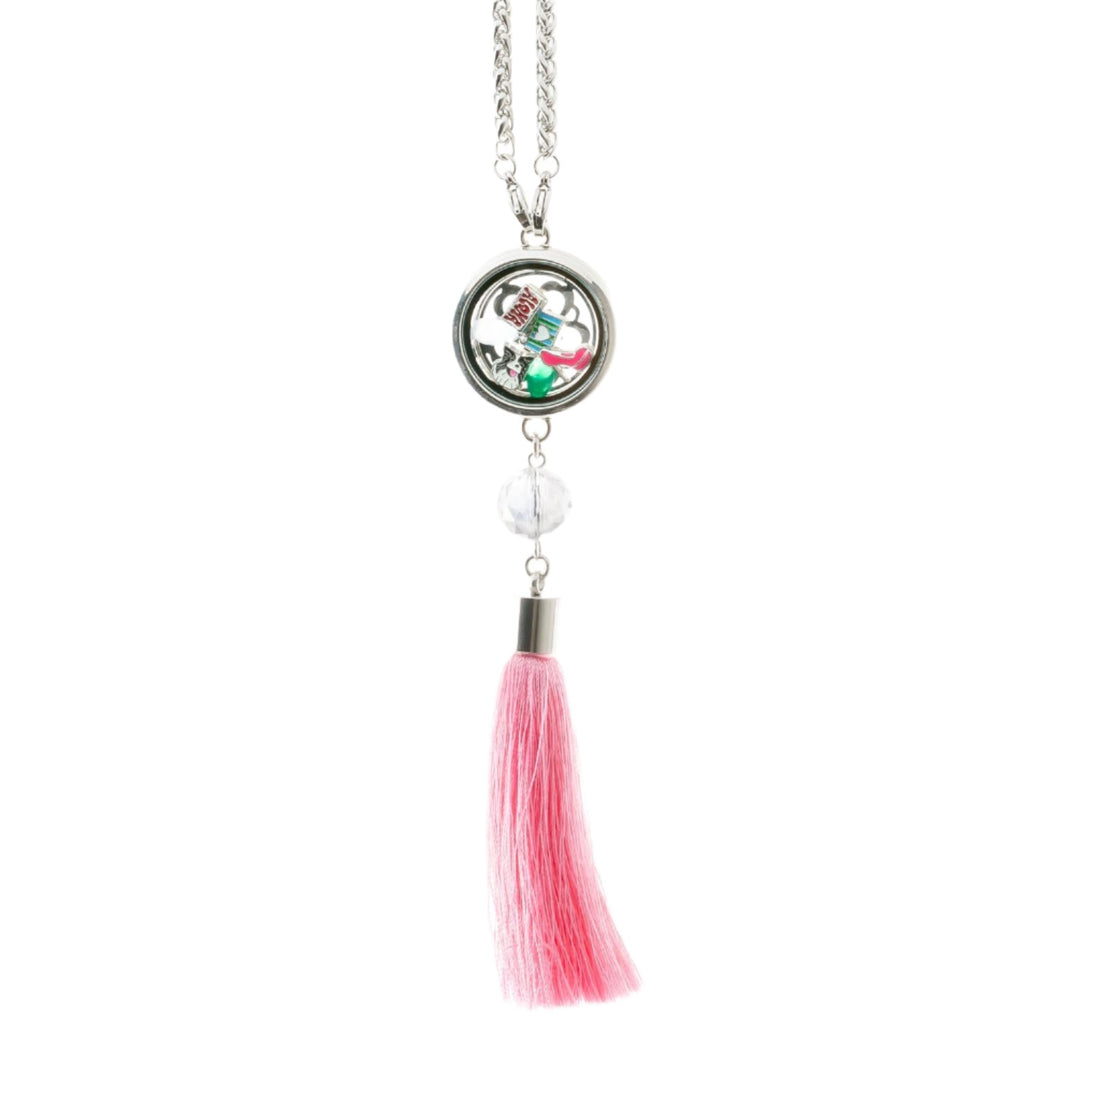 Pink Car Hanging Glass Locket with Tassel holds baby gems and pearls